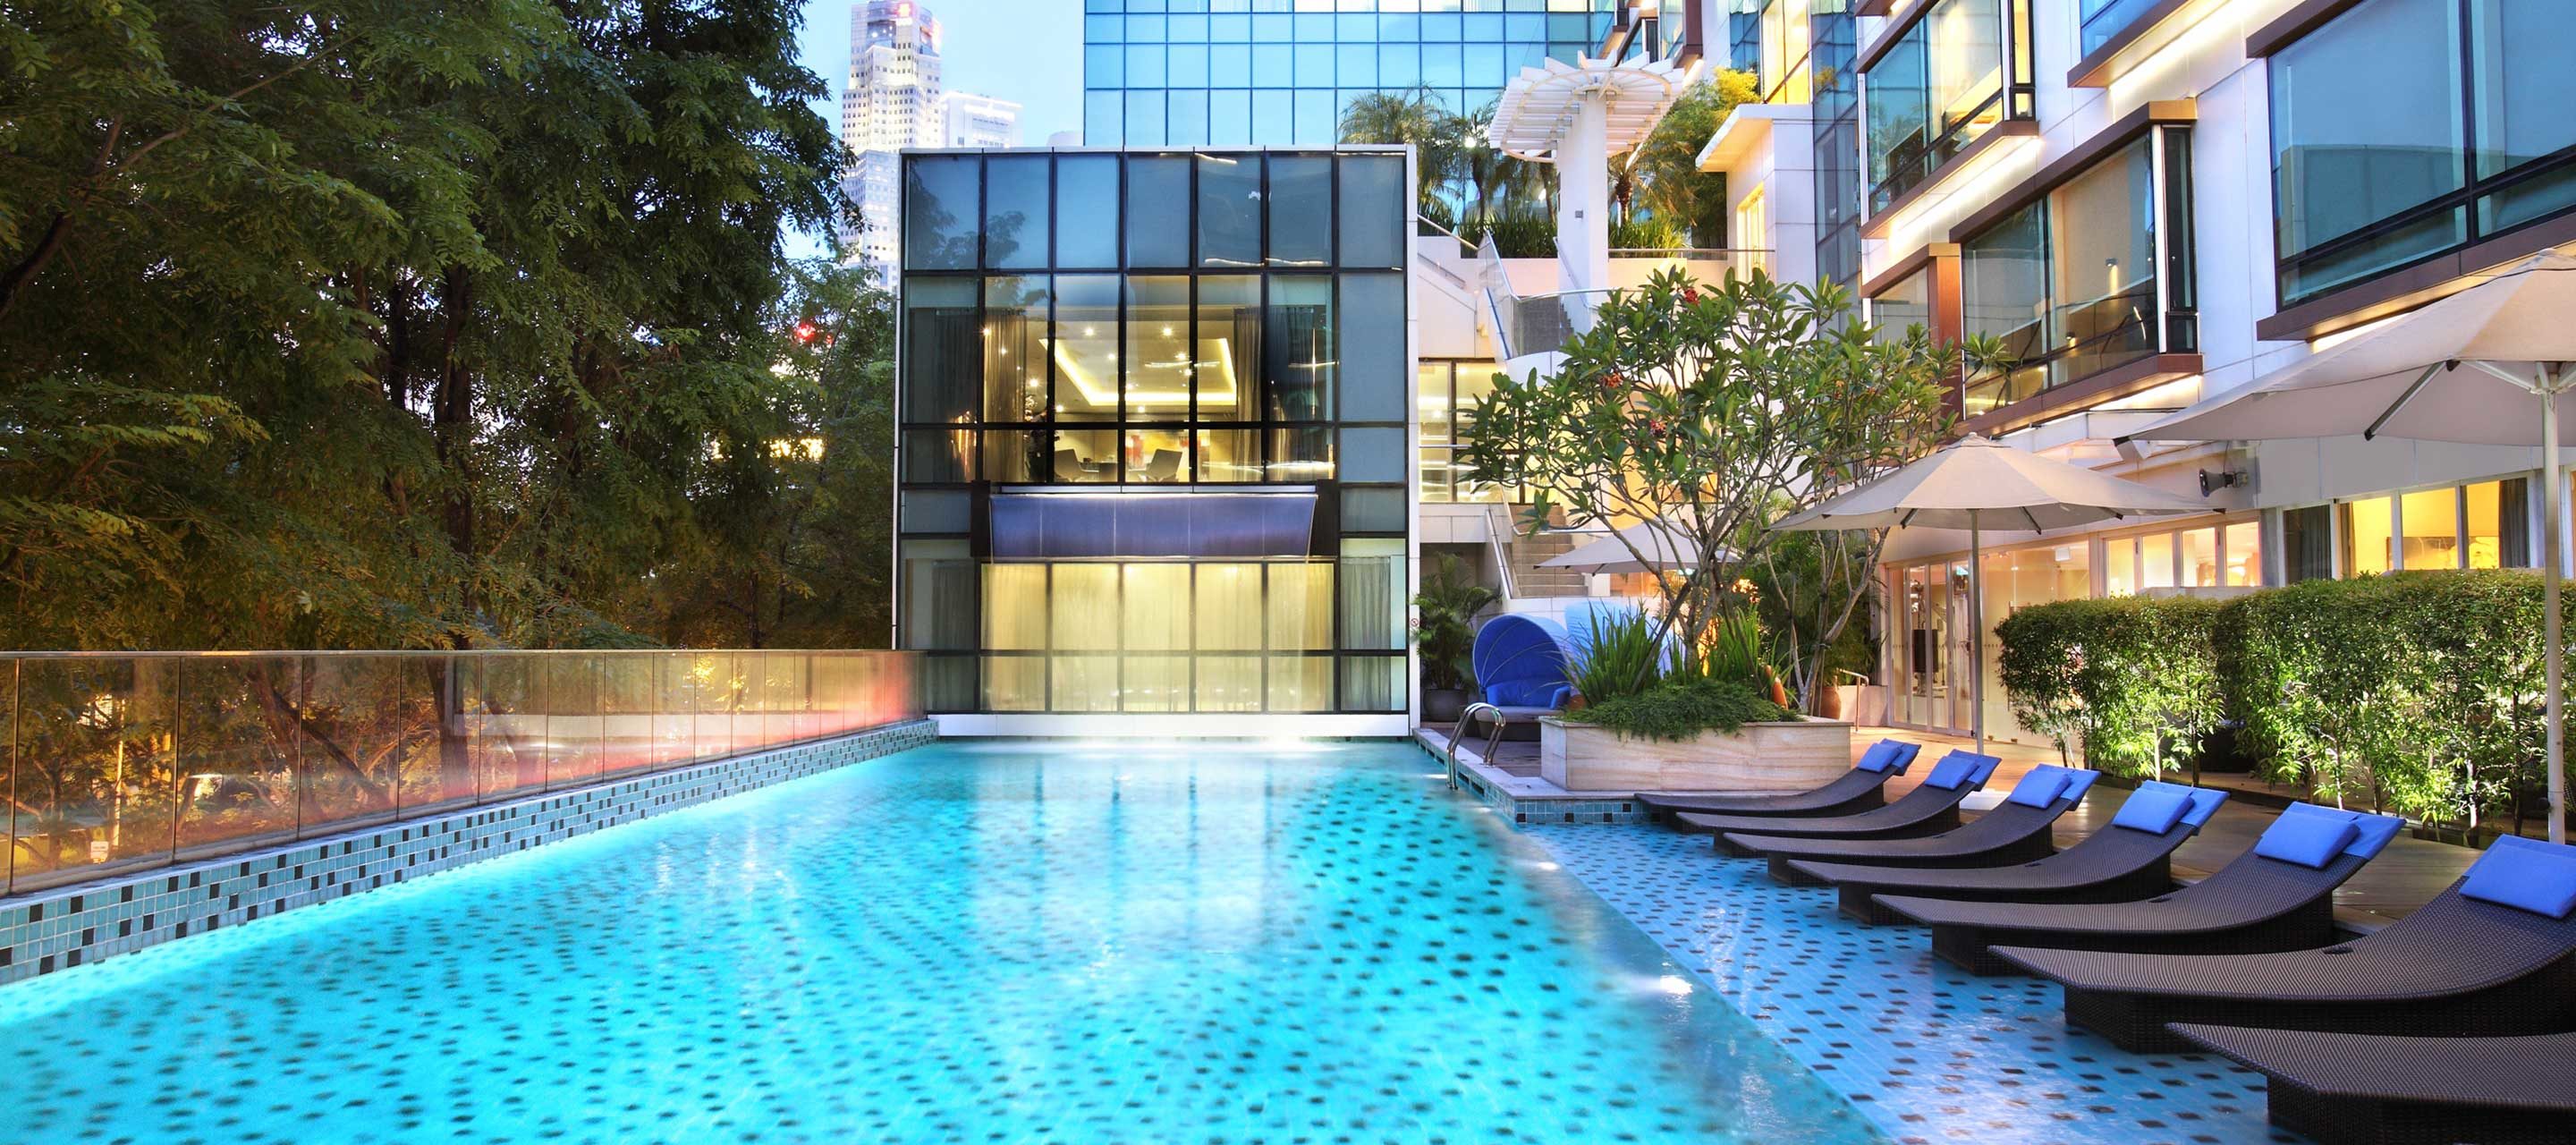 A Swimming Pool Outside A Building